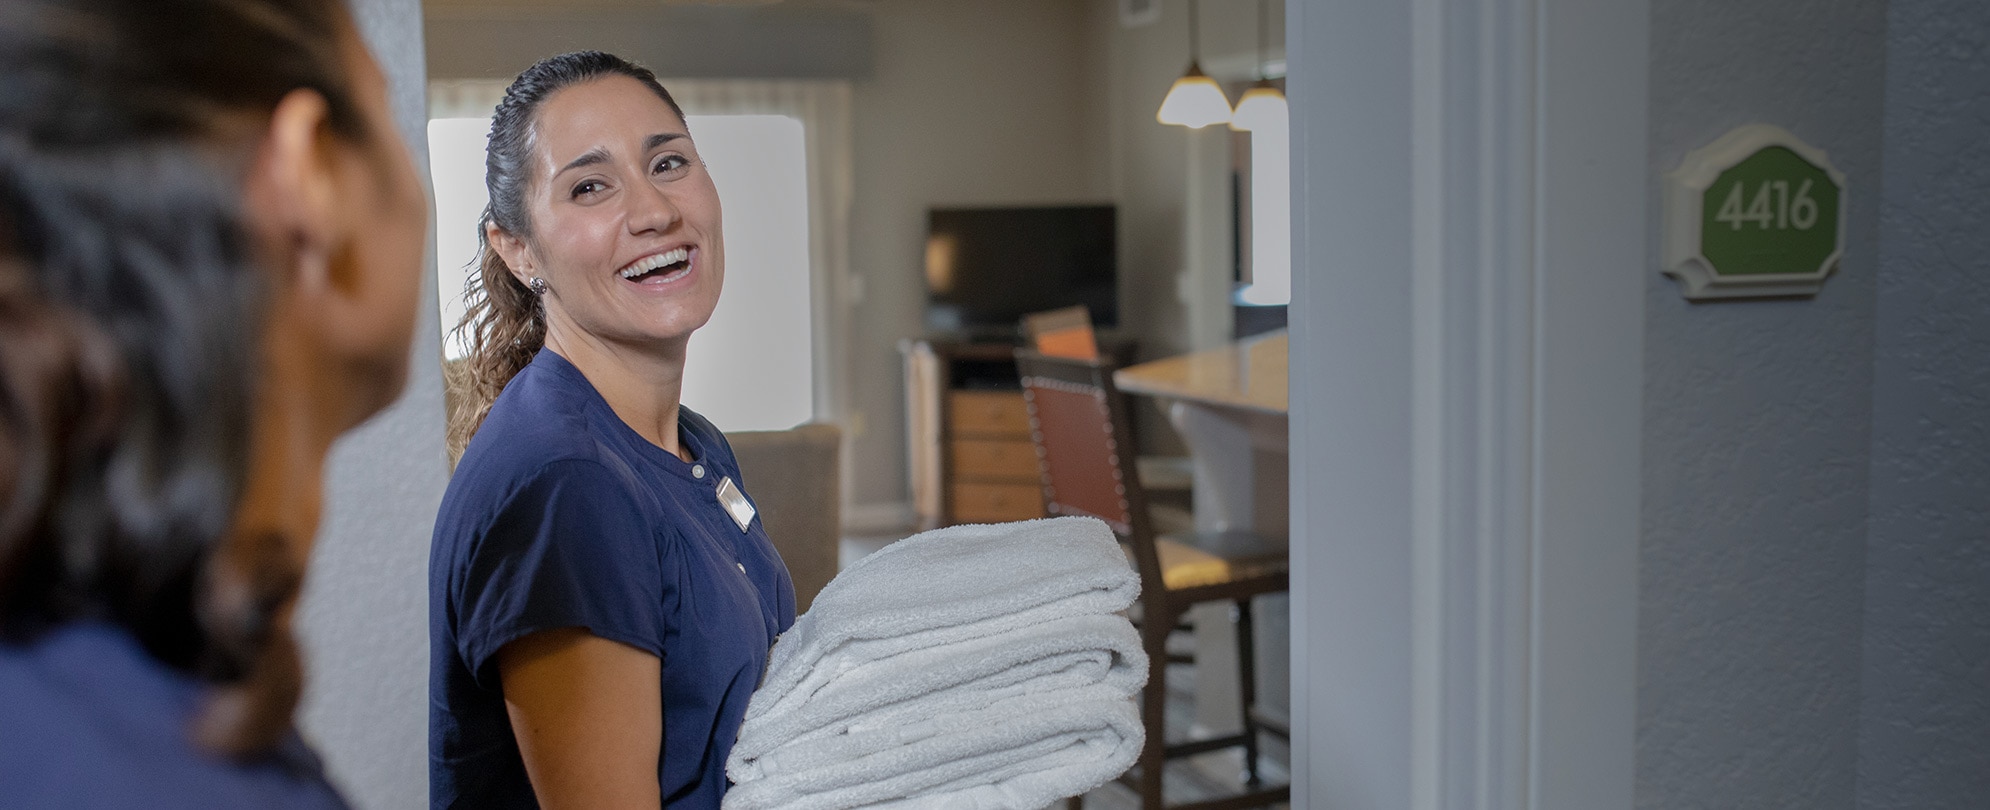 A smiling Club Wyndham employee holds a pile of towels as she enters a resort suite.